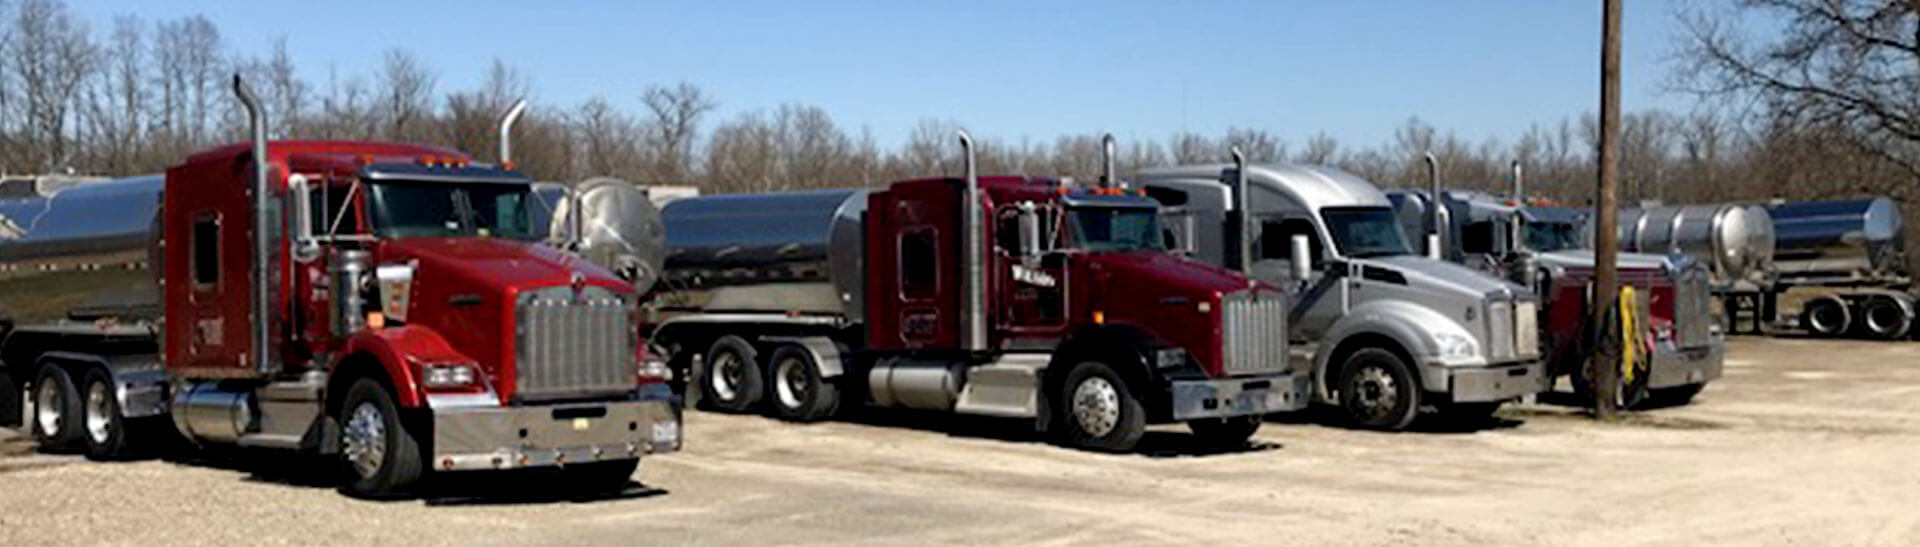 Fairfield Trucking Company and Trucking Services